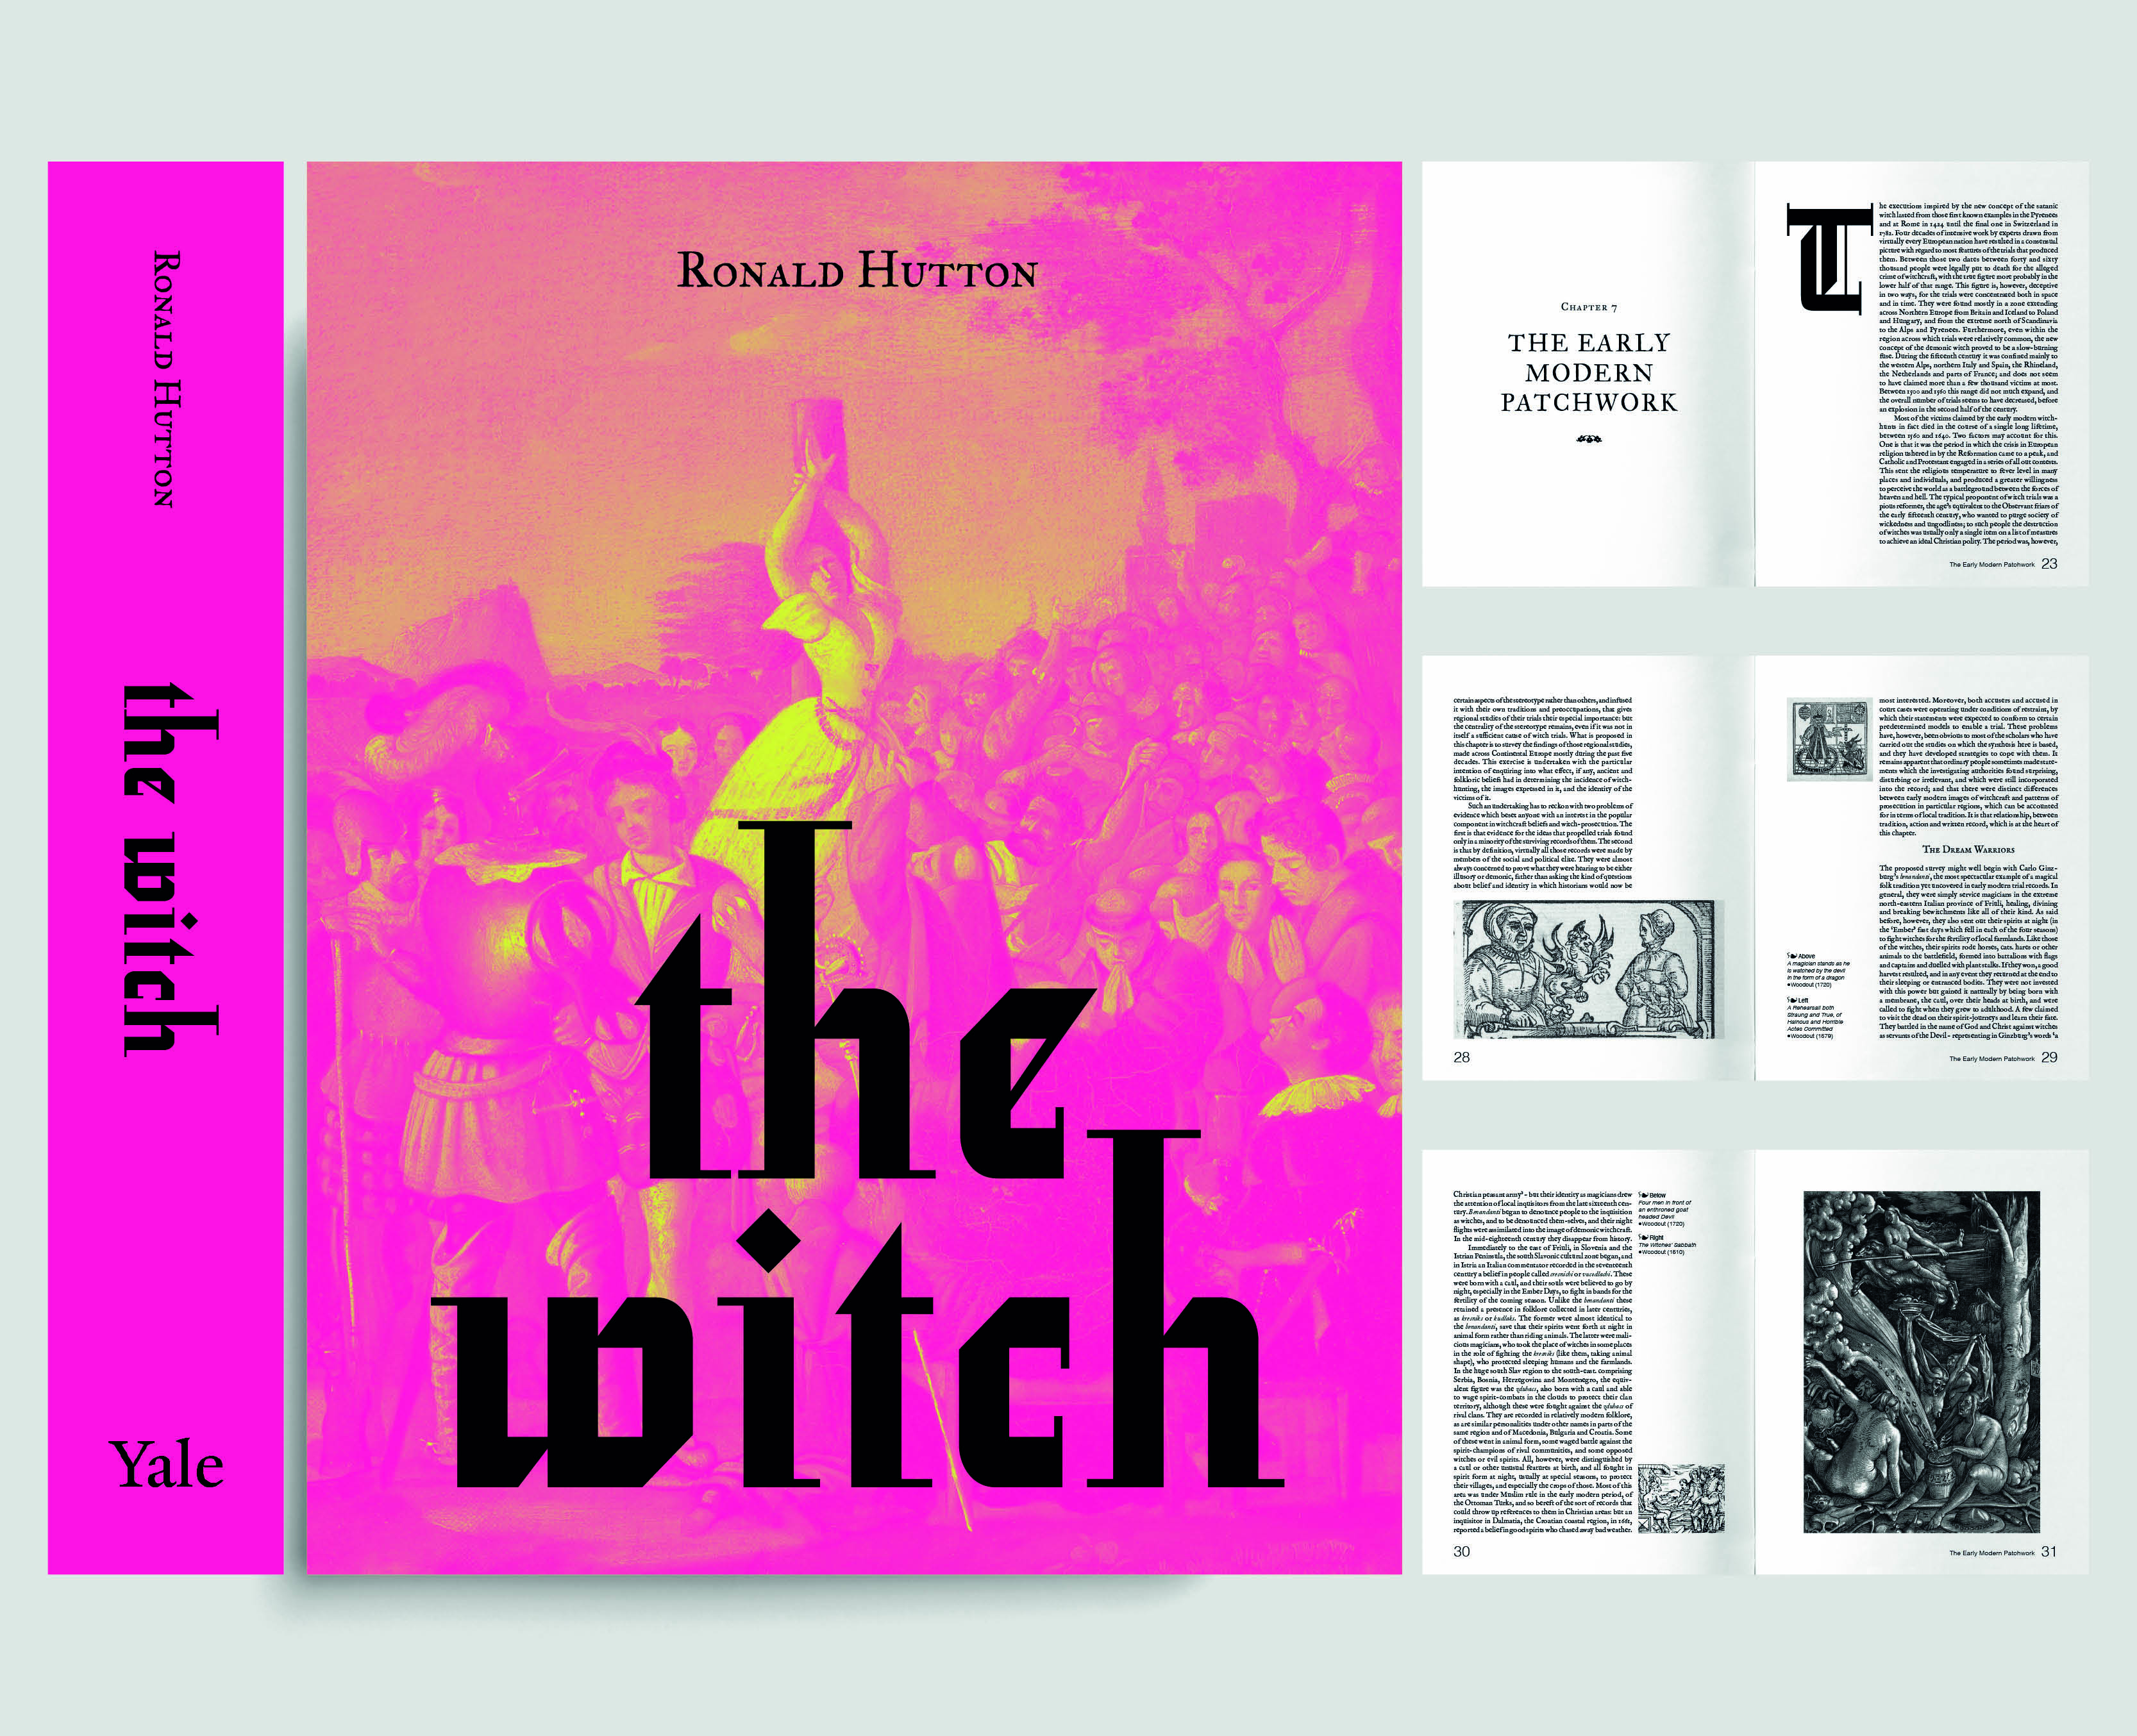 A book layout and design project by Imogen Allen showing a pink, modern cover contrasting with historic typographic elements.